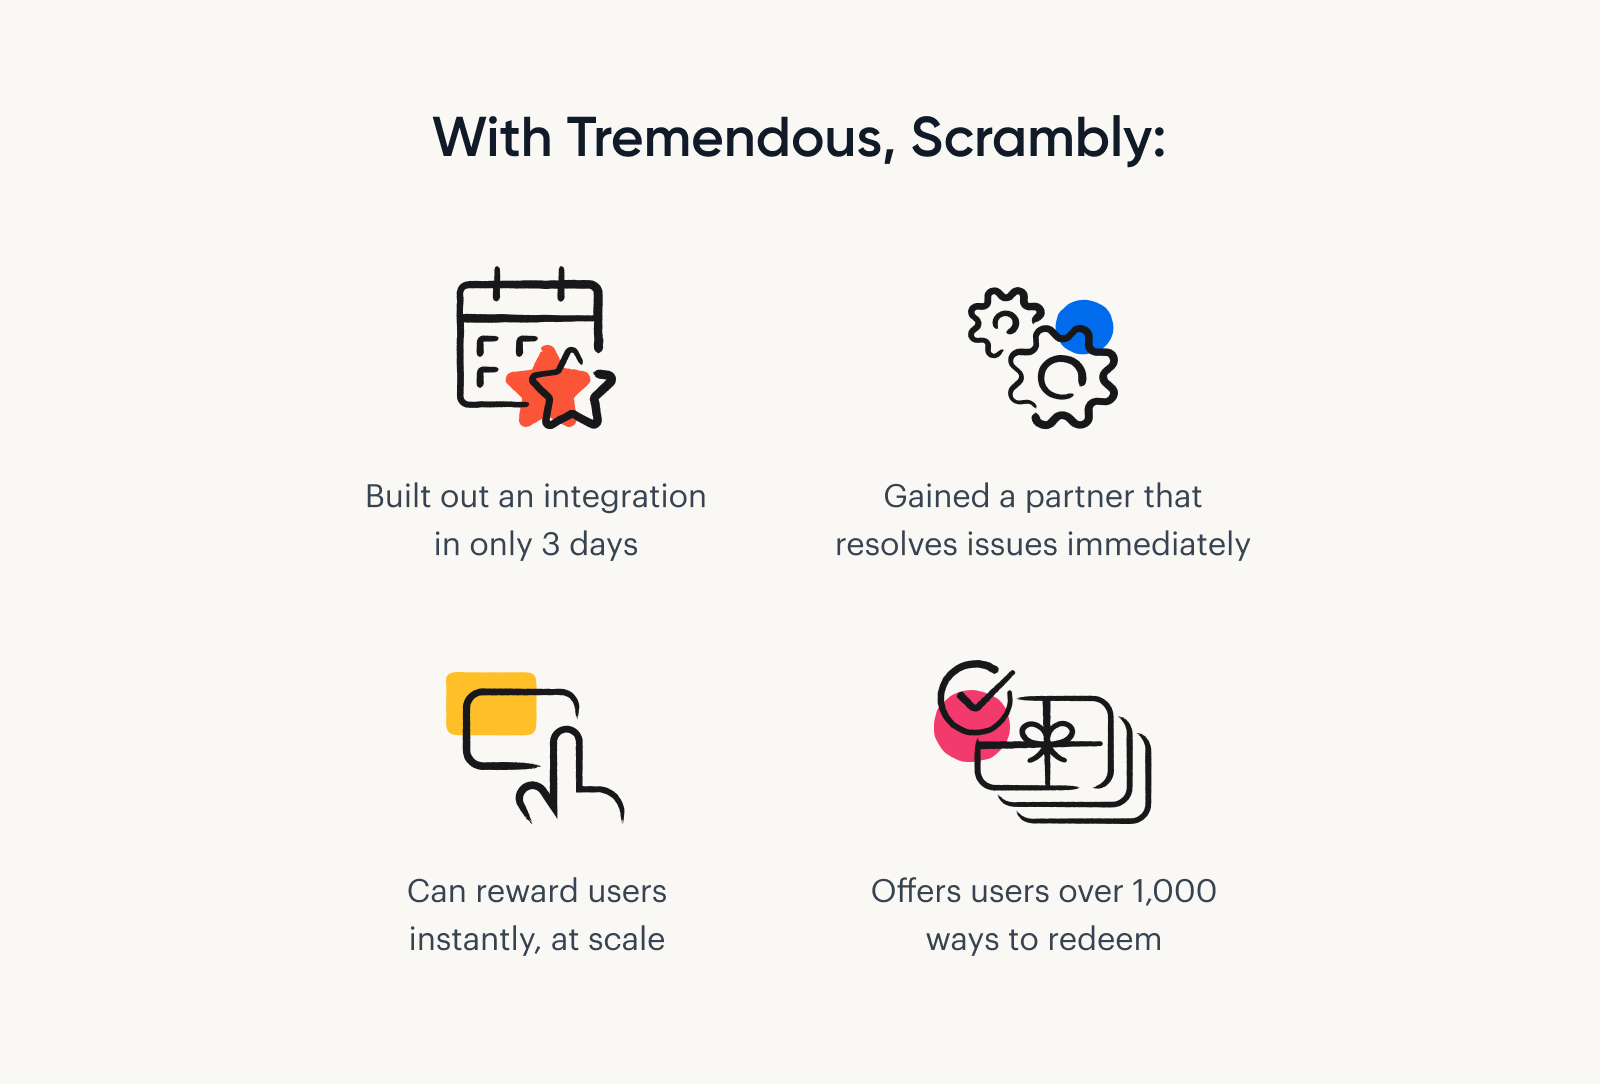 Scrambly built an integration for Tremendous in just 3 days, and now offers users over 1,000 ways to redeem their reward.